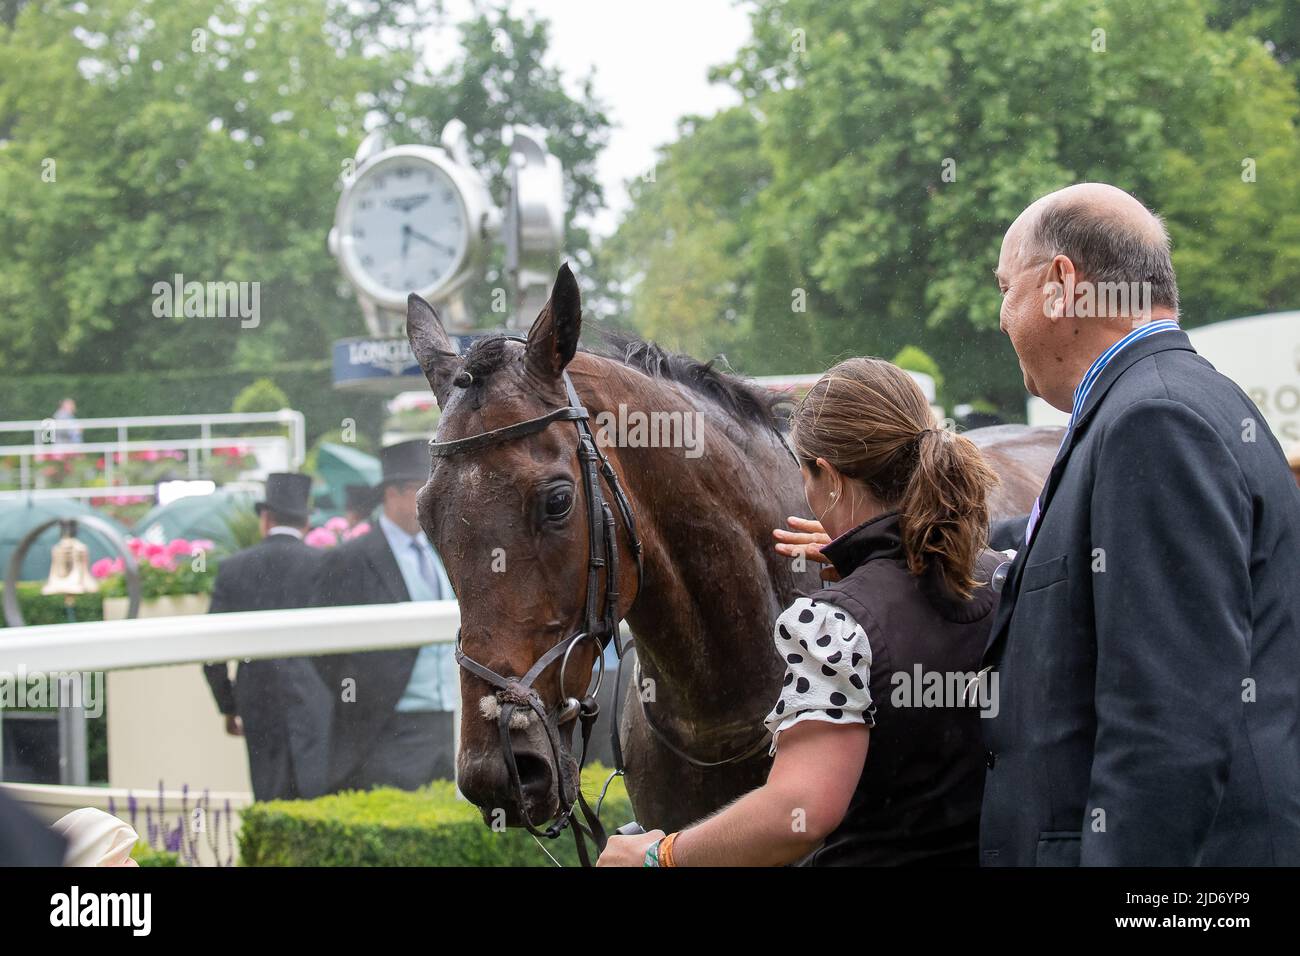 Ascot, Berkshire, UK. 18th June, 2022. Jockey William Buick riding horse Stratum won the Queen Alexandra Stakes today at Royal Ascot in the last race. Credit: Maureen McLean/Alamy Live News Stock Photo